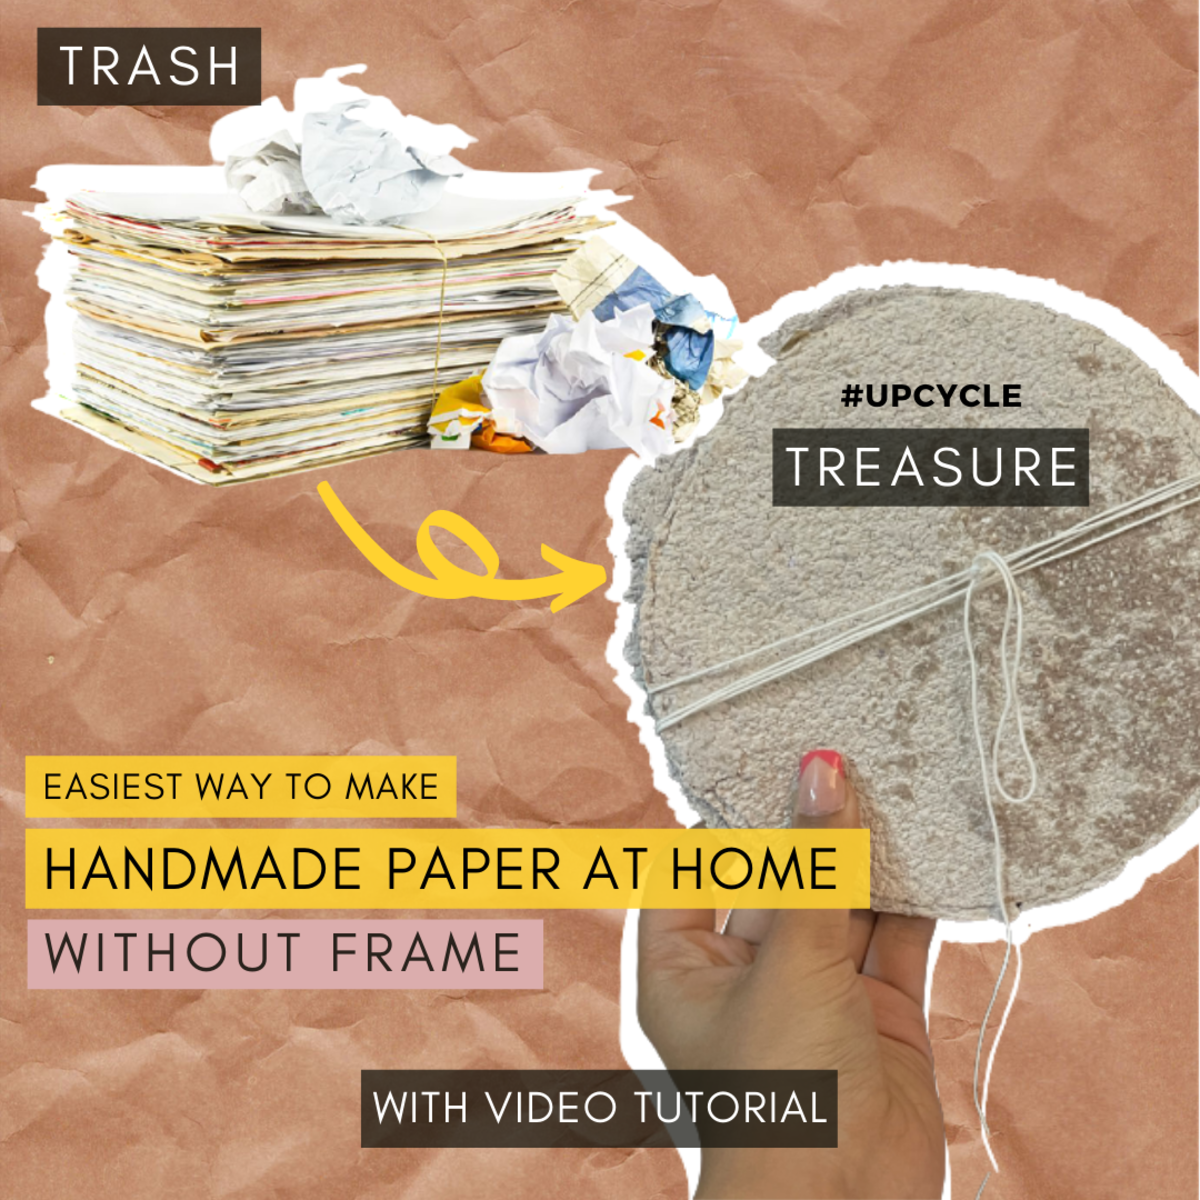 how-to-make-handmade-paper-at-home-with-video-tutorial